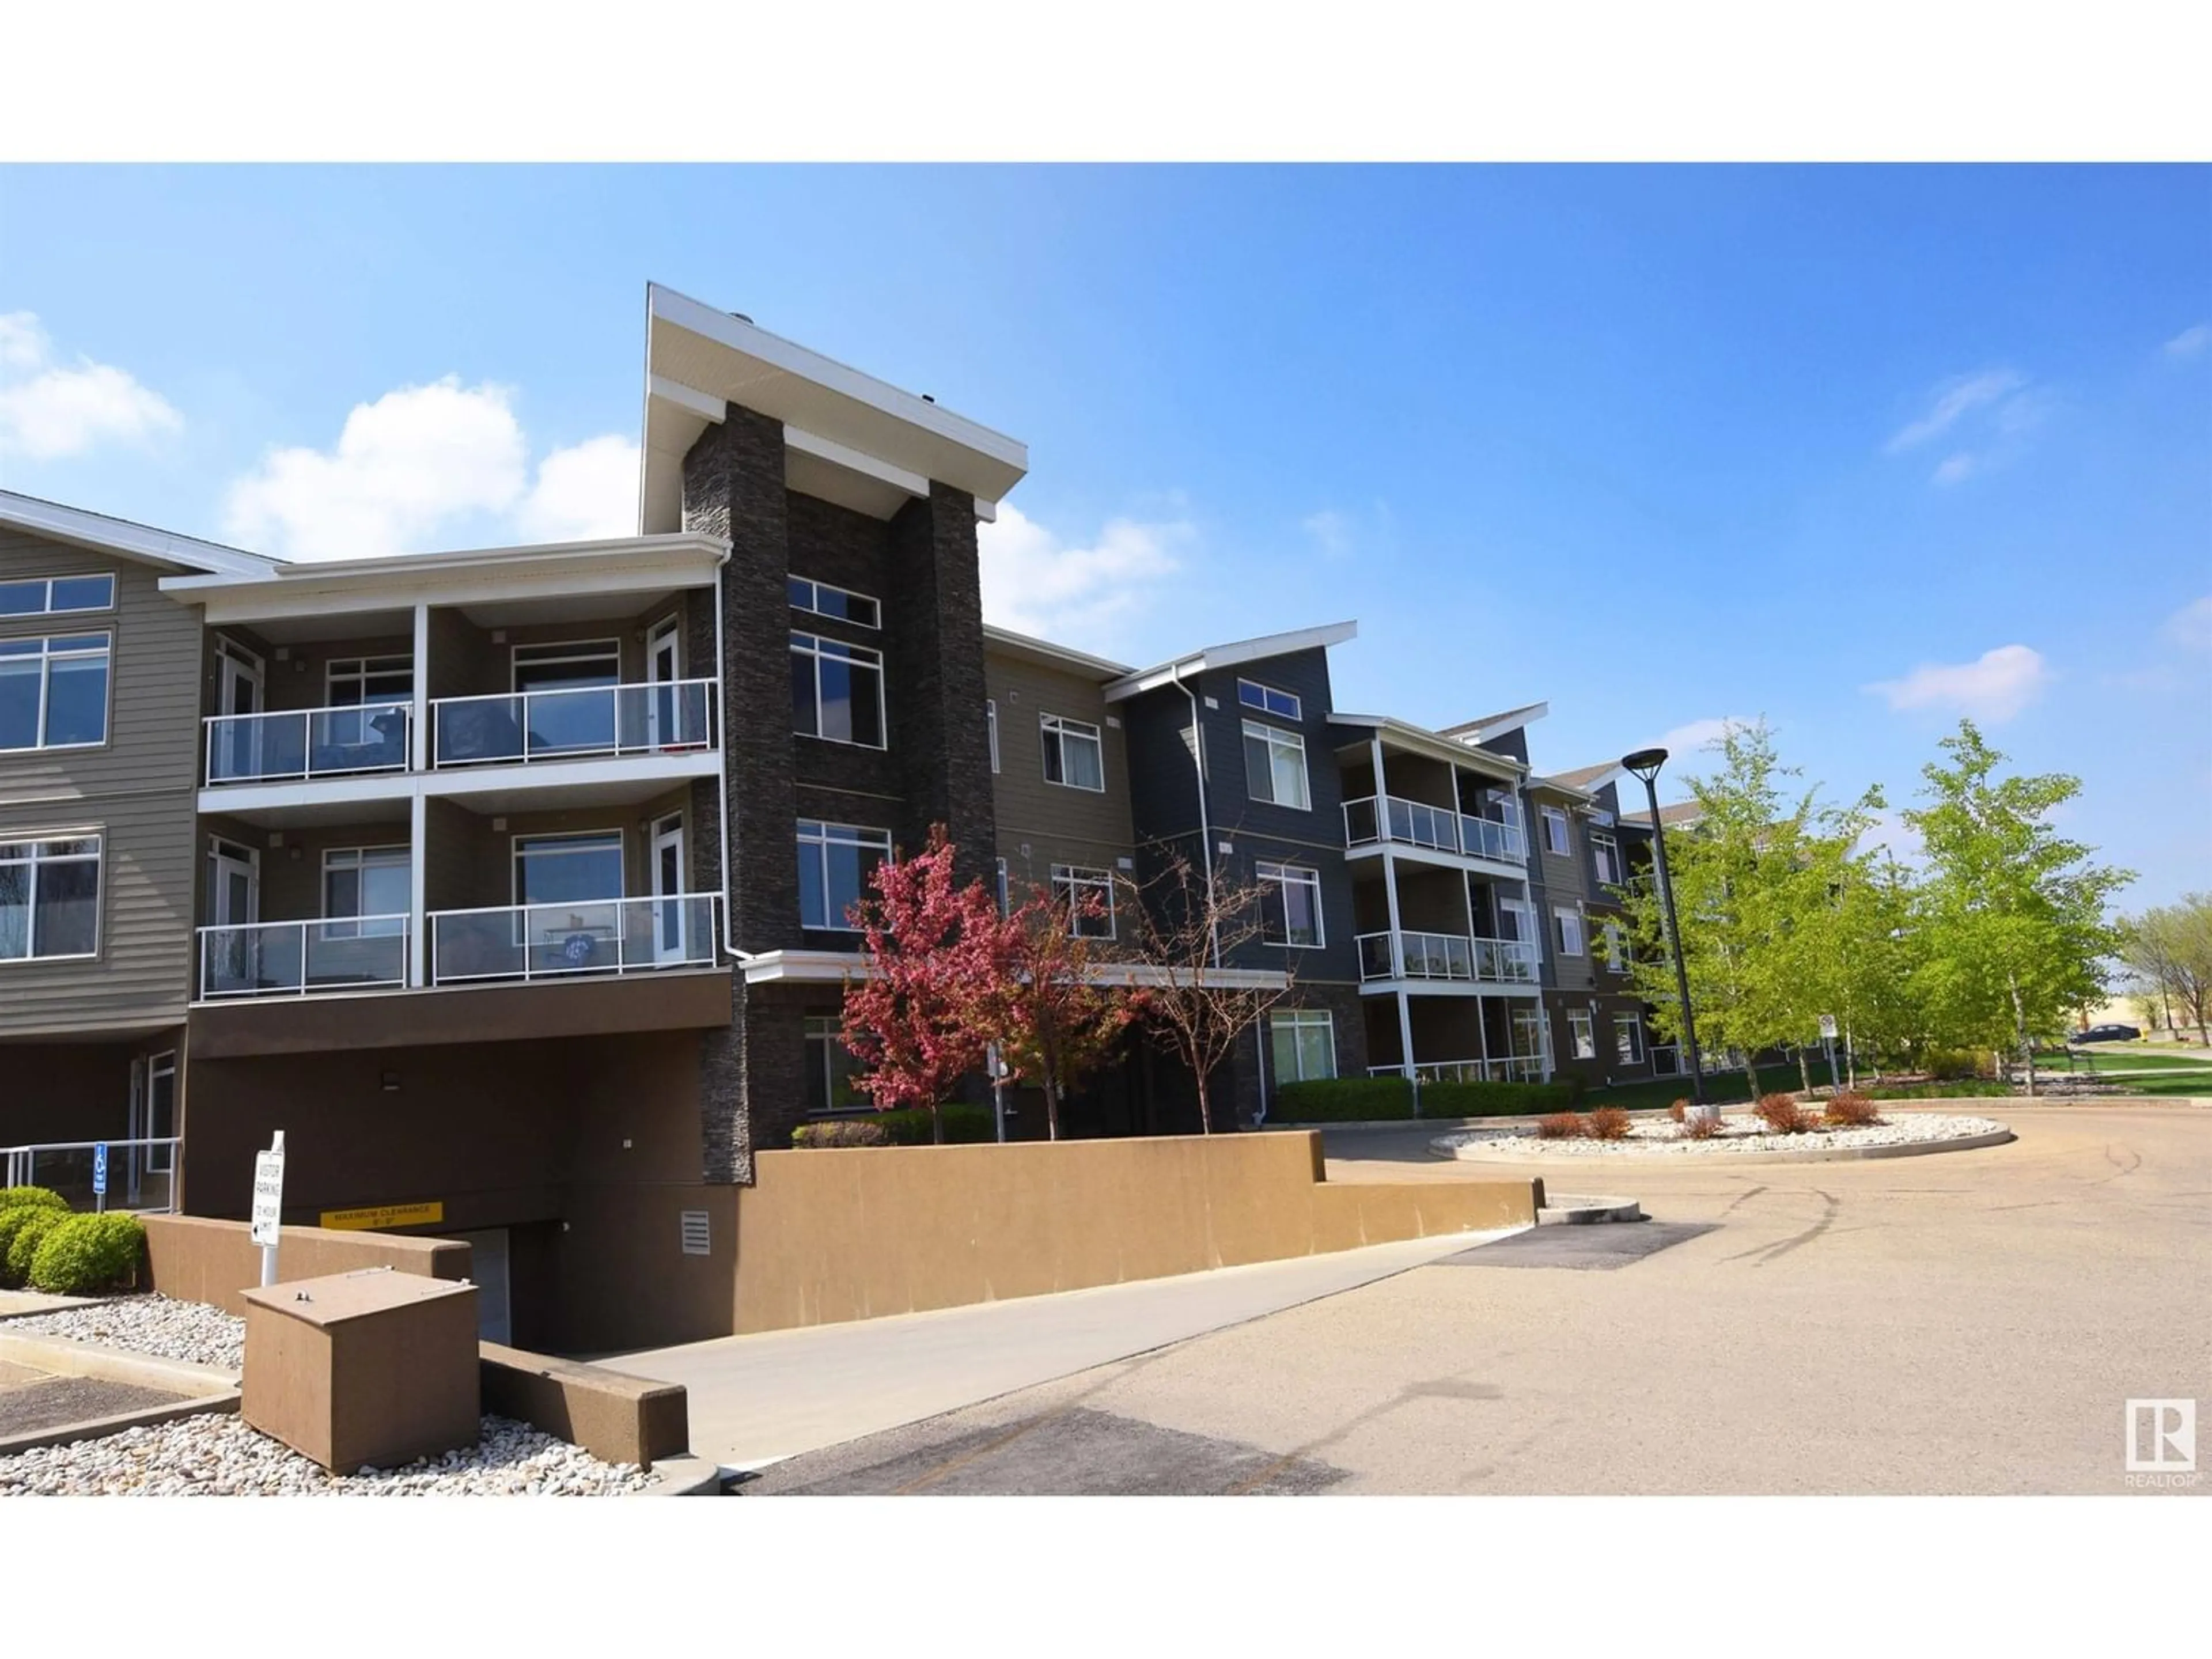 A pic from exterior of the house or condo for #105 279 Wye RD, Sherwood Park Alberta T8B0A7